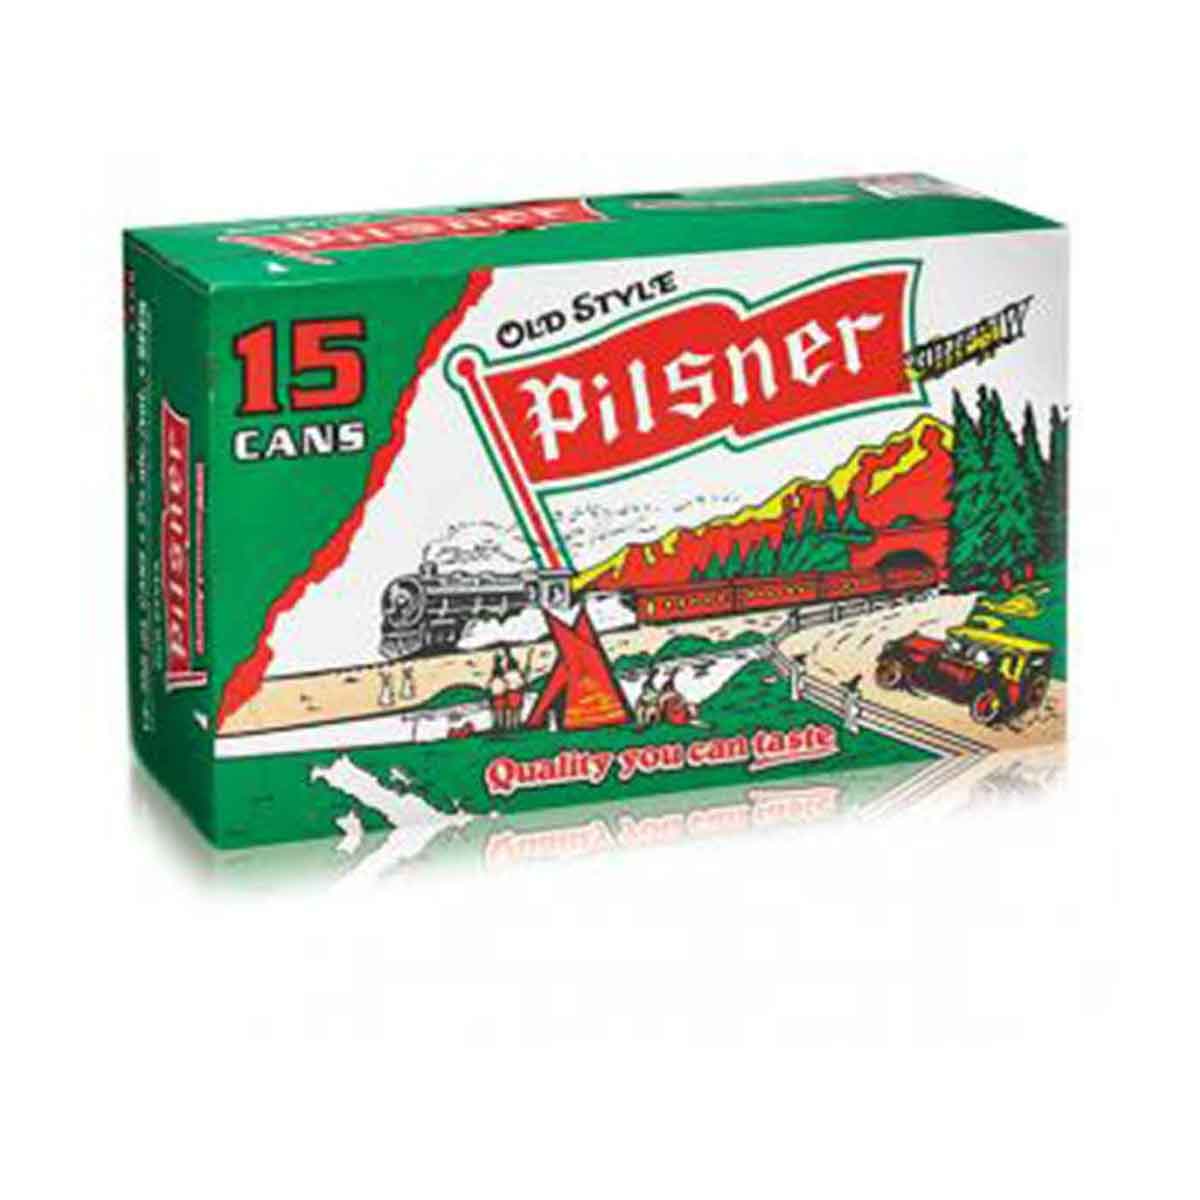 TAG Liquor Stores BC-OLD STYLE PISLNER 15 CANS